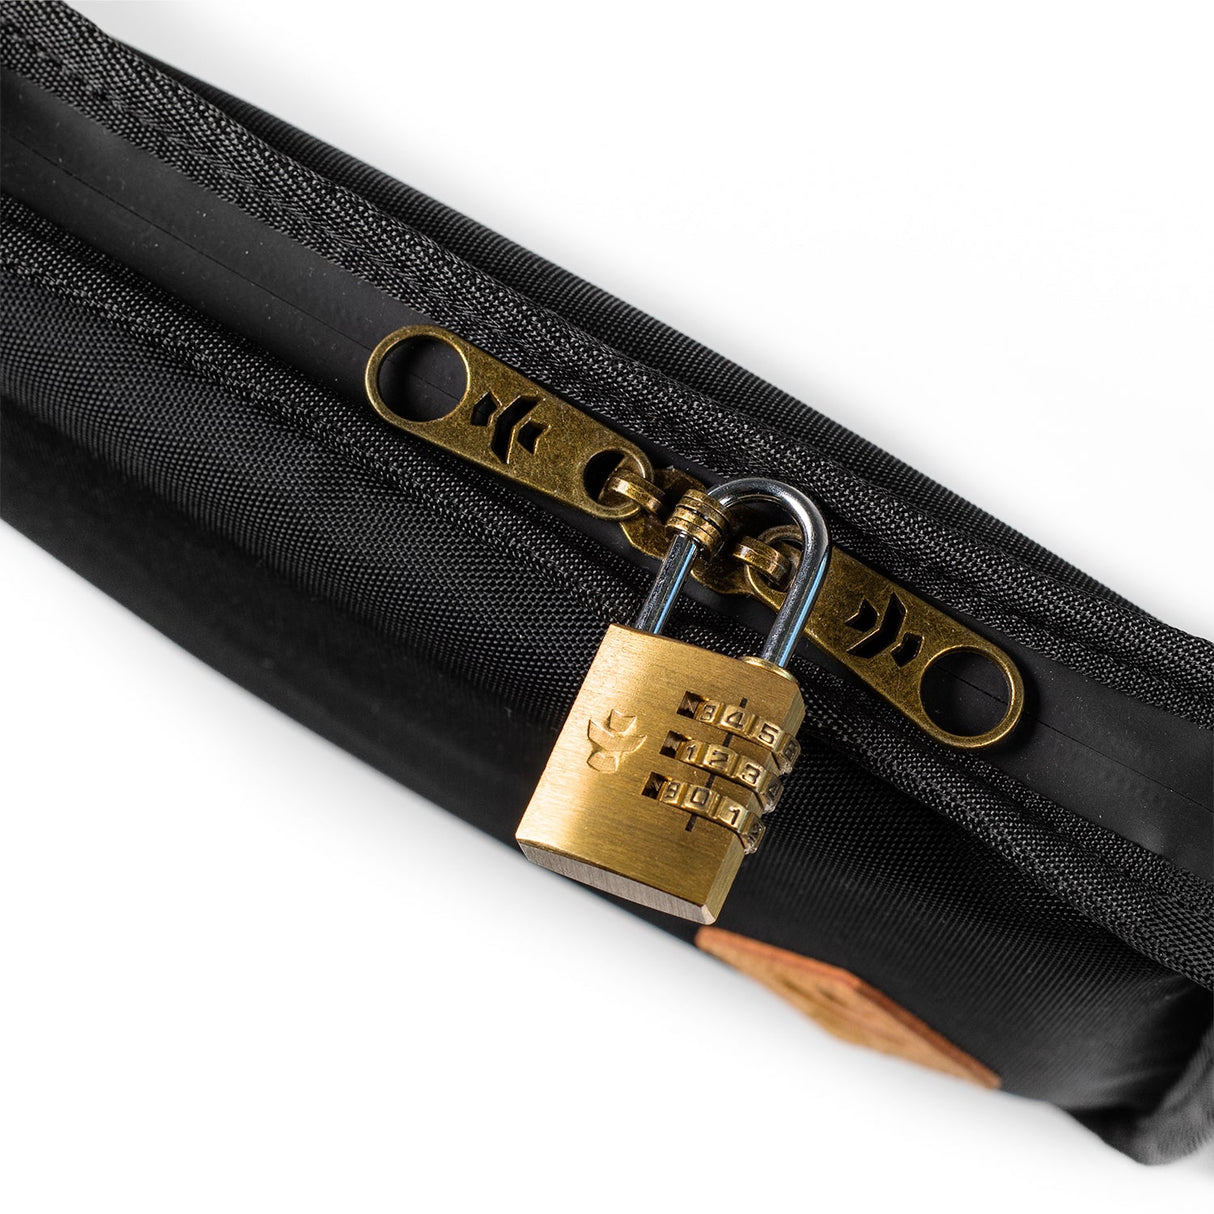 Revelry Supply 'The Gordo' Smell Proof Pouch with Padlock - Close-Up Detail